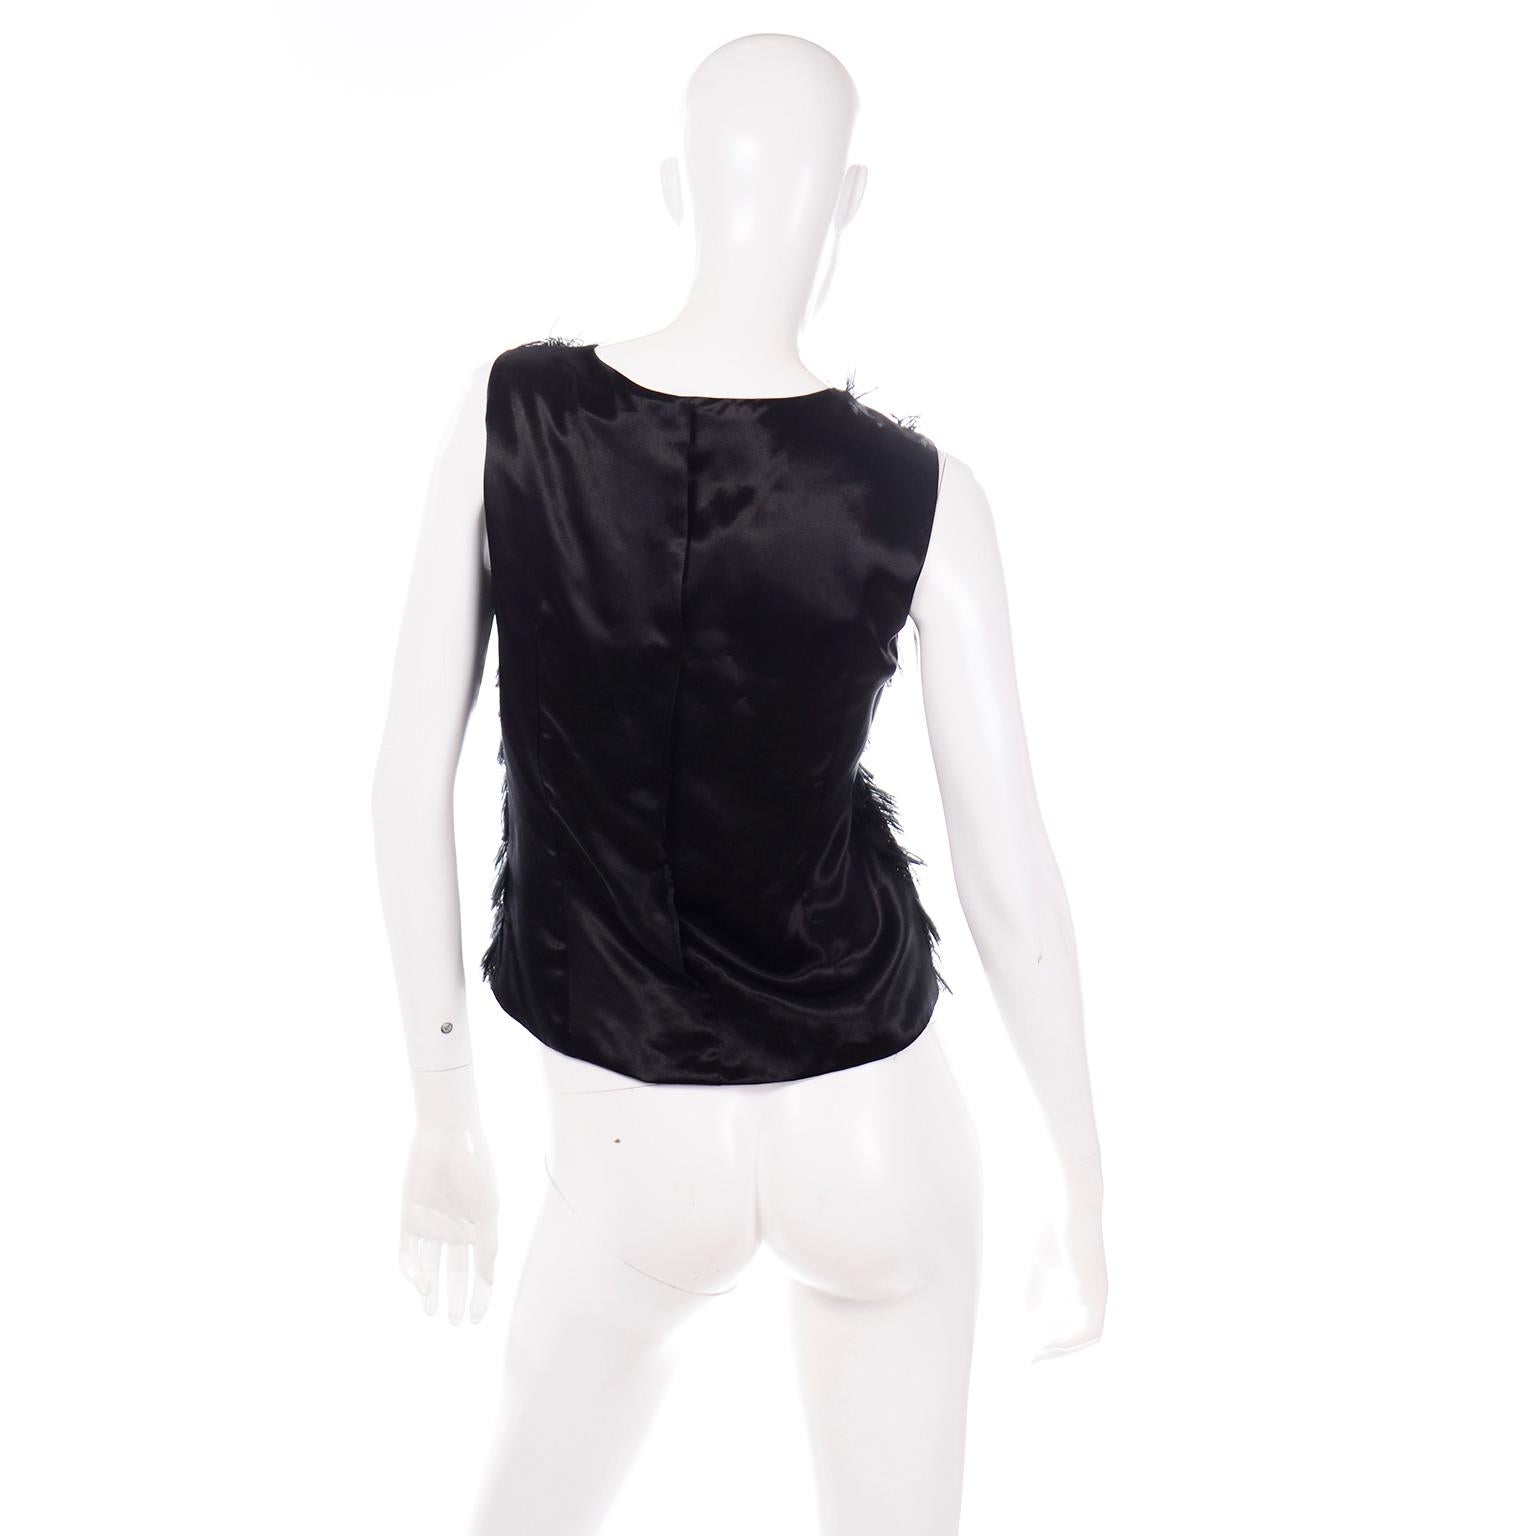 Alber Elbaz Lanvin Fall Winter 2014 Sleeveless Black Eyelash Fringe Evening Top In Excellent Condition For Sale In Portland, OR